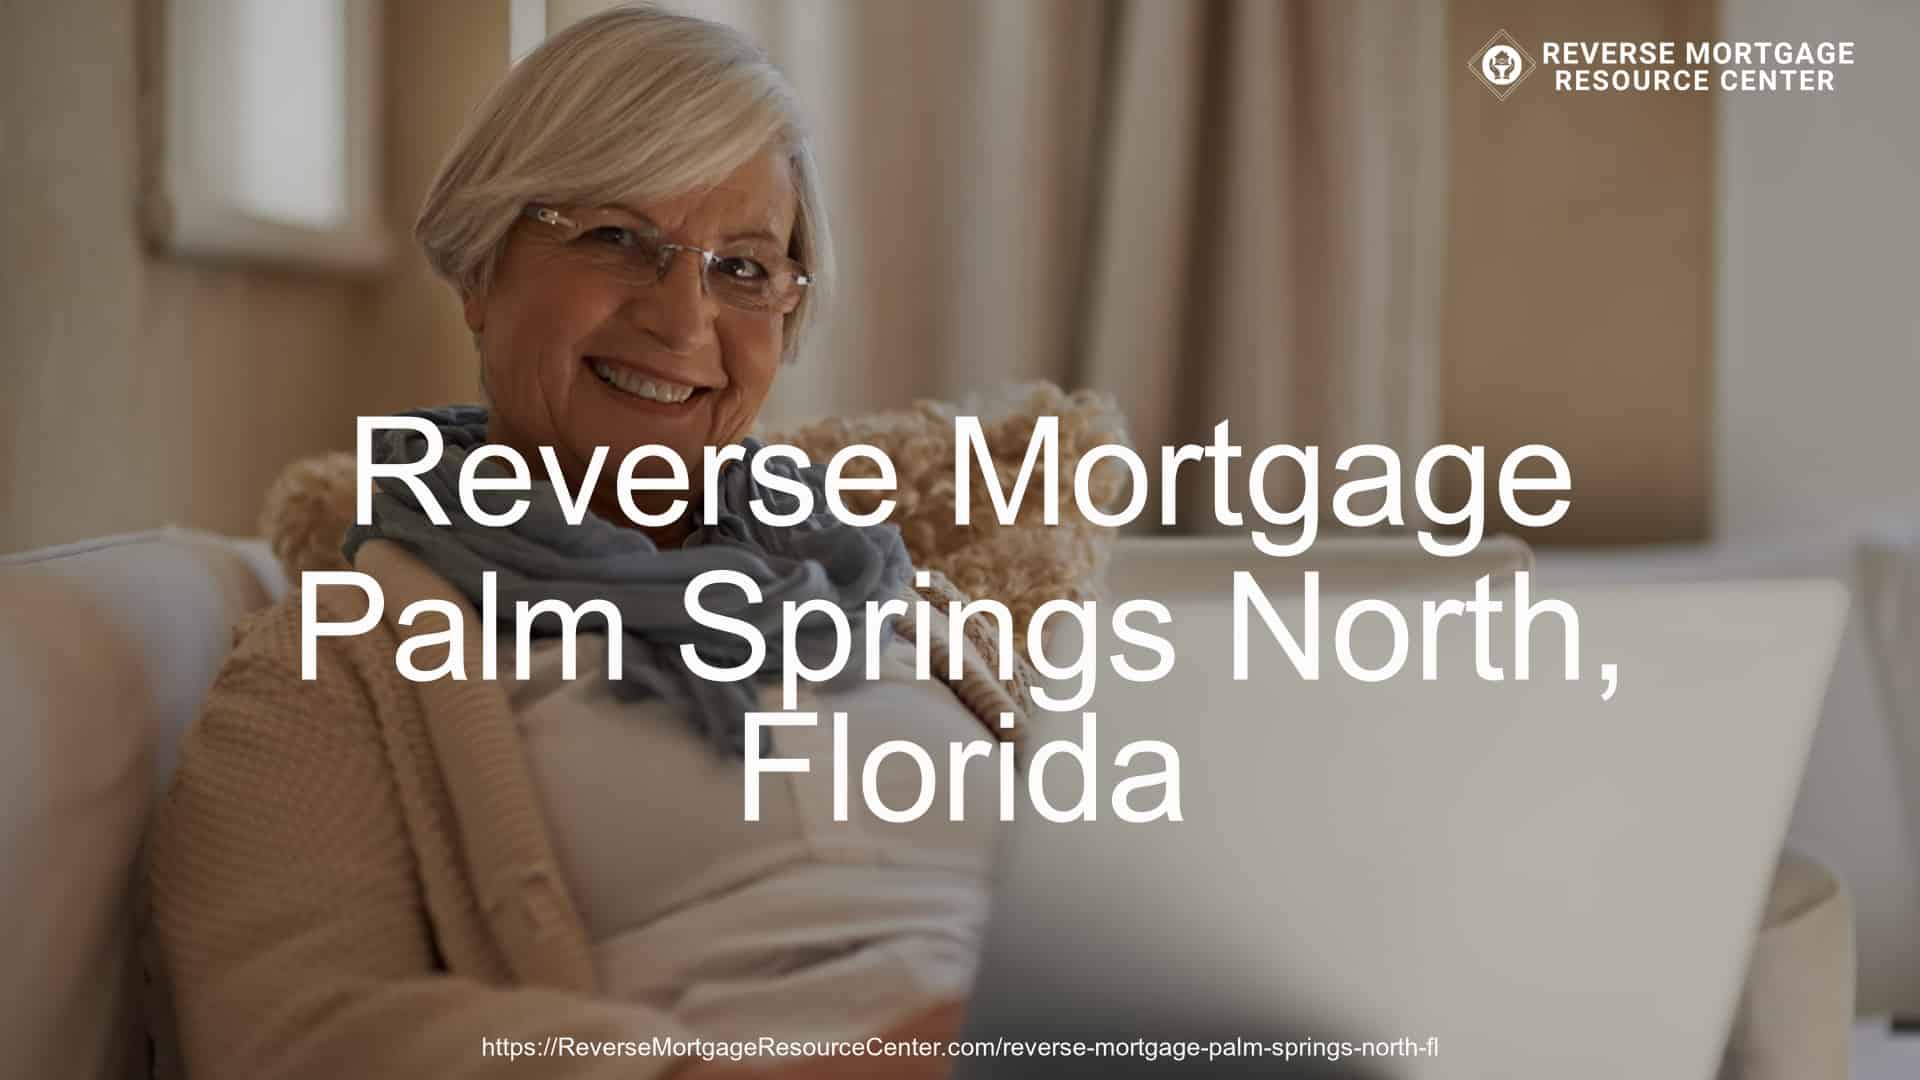 Reverse Mortgage in Palm Springs North, FL